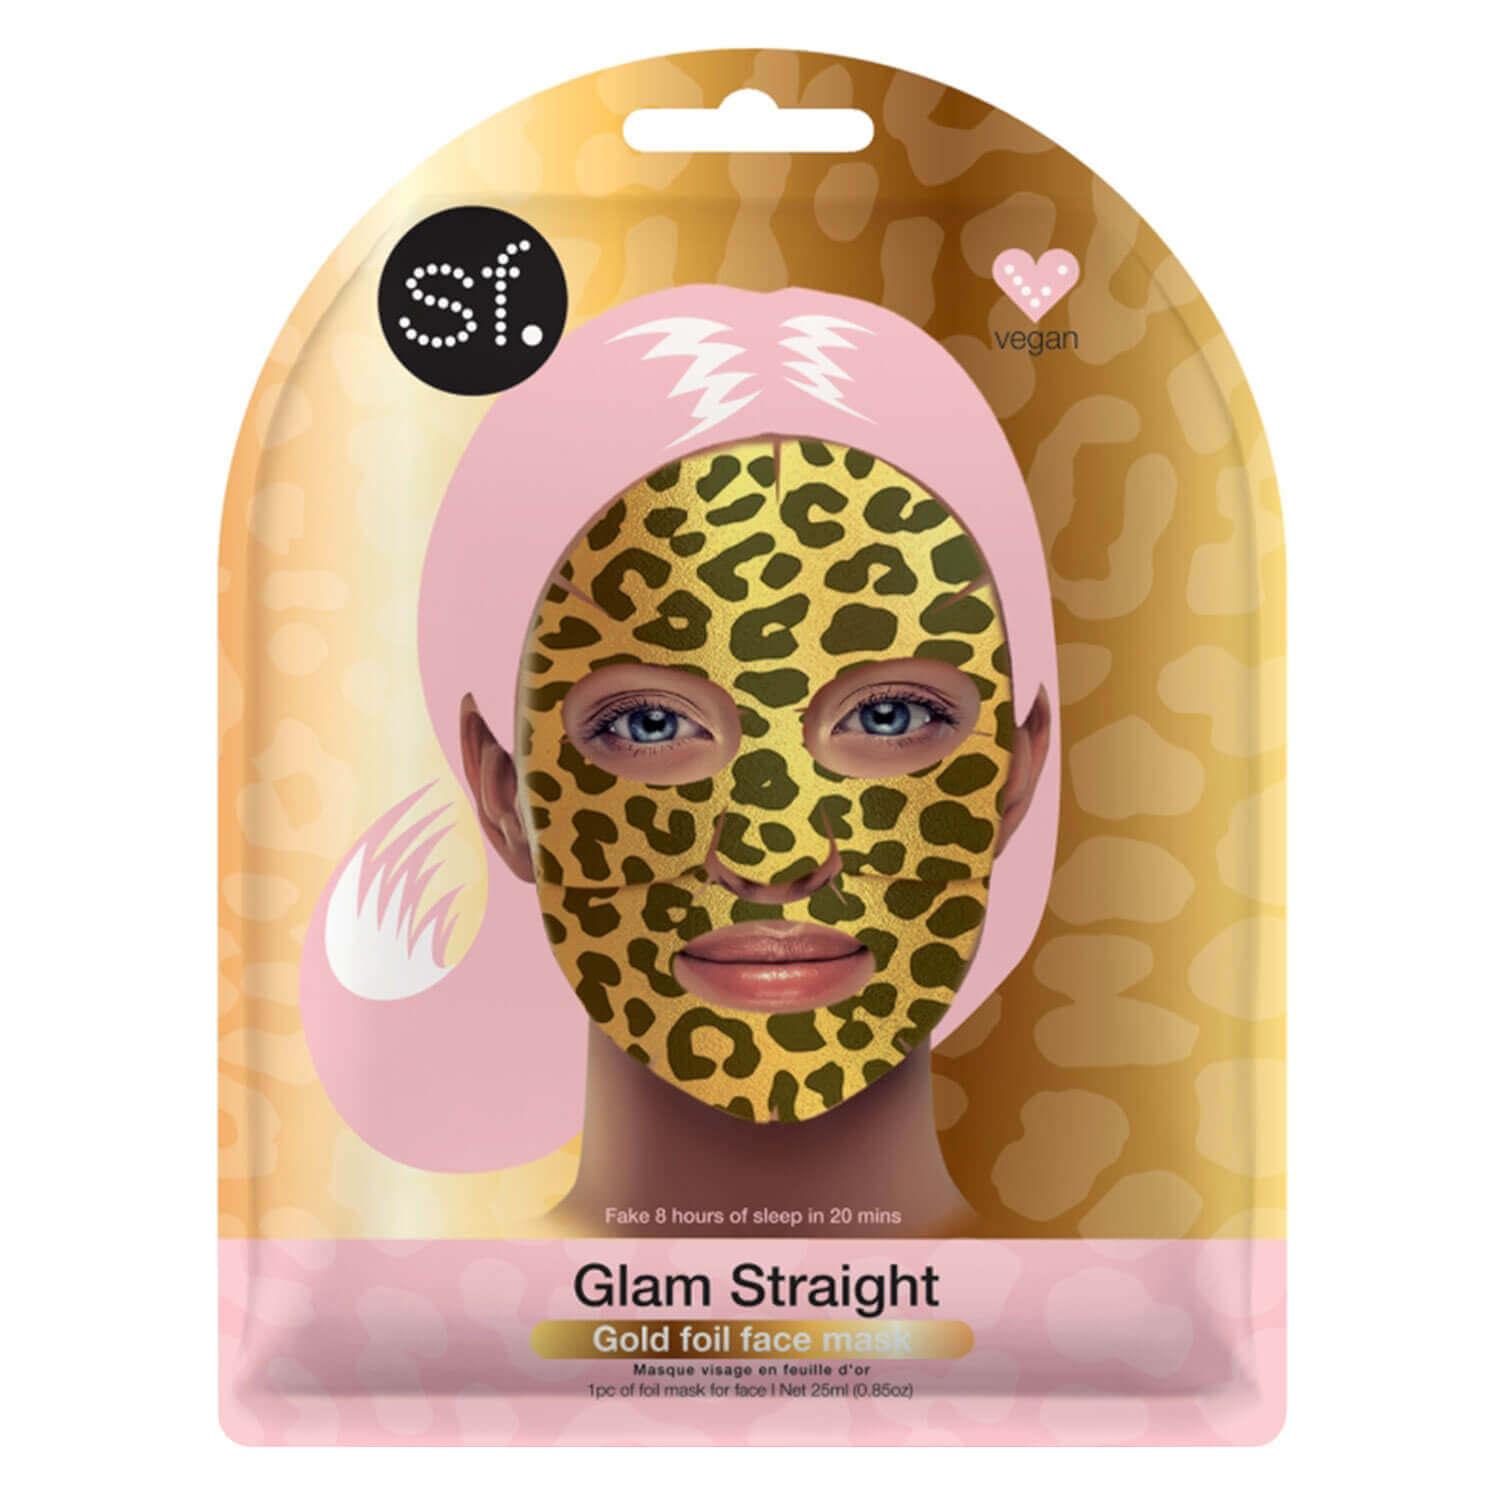 sf. - Glam Straight Gold foil face mask